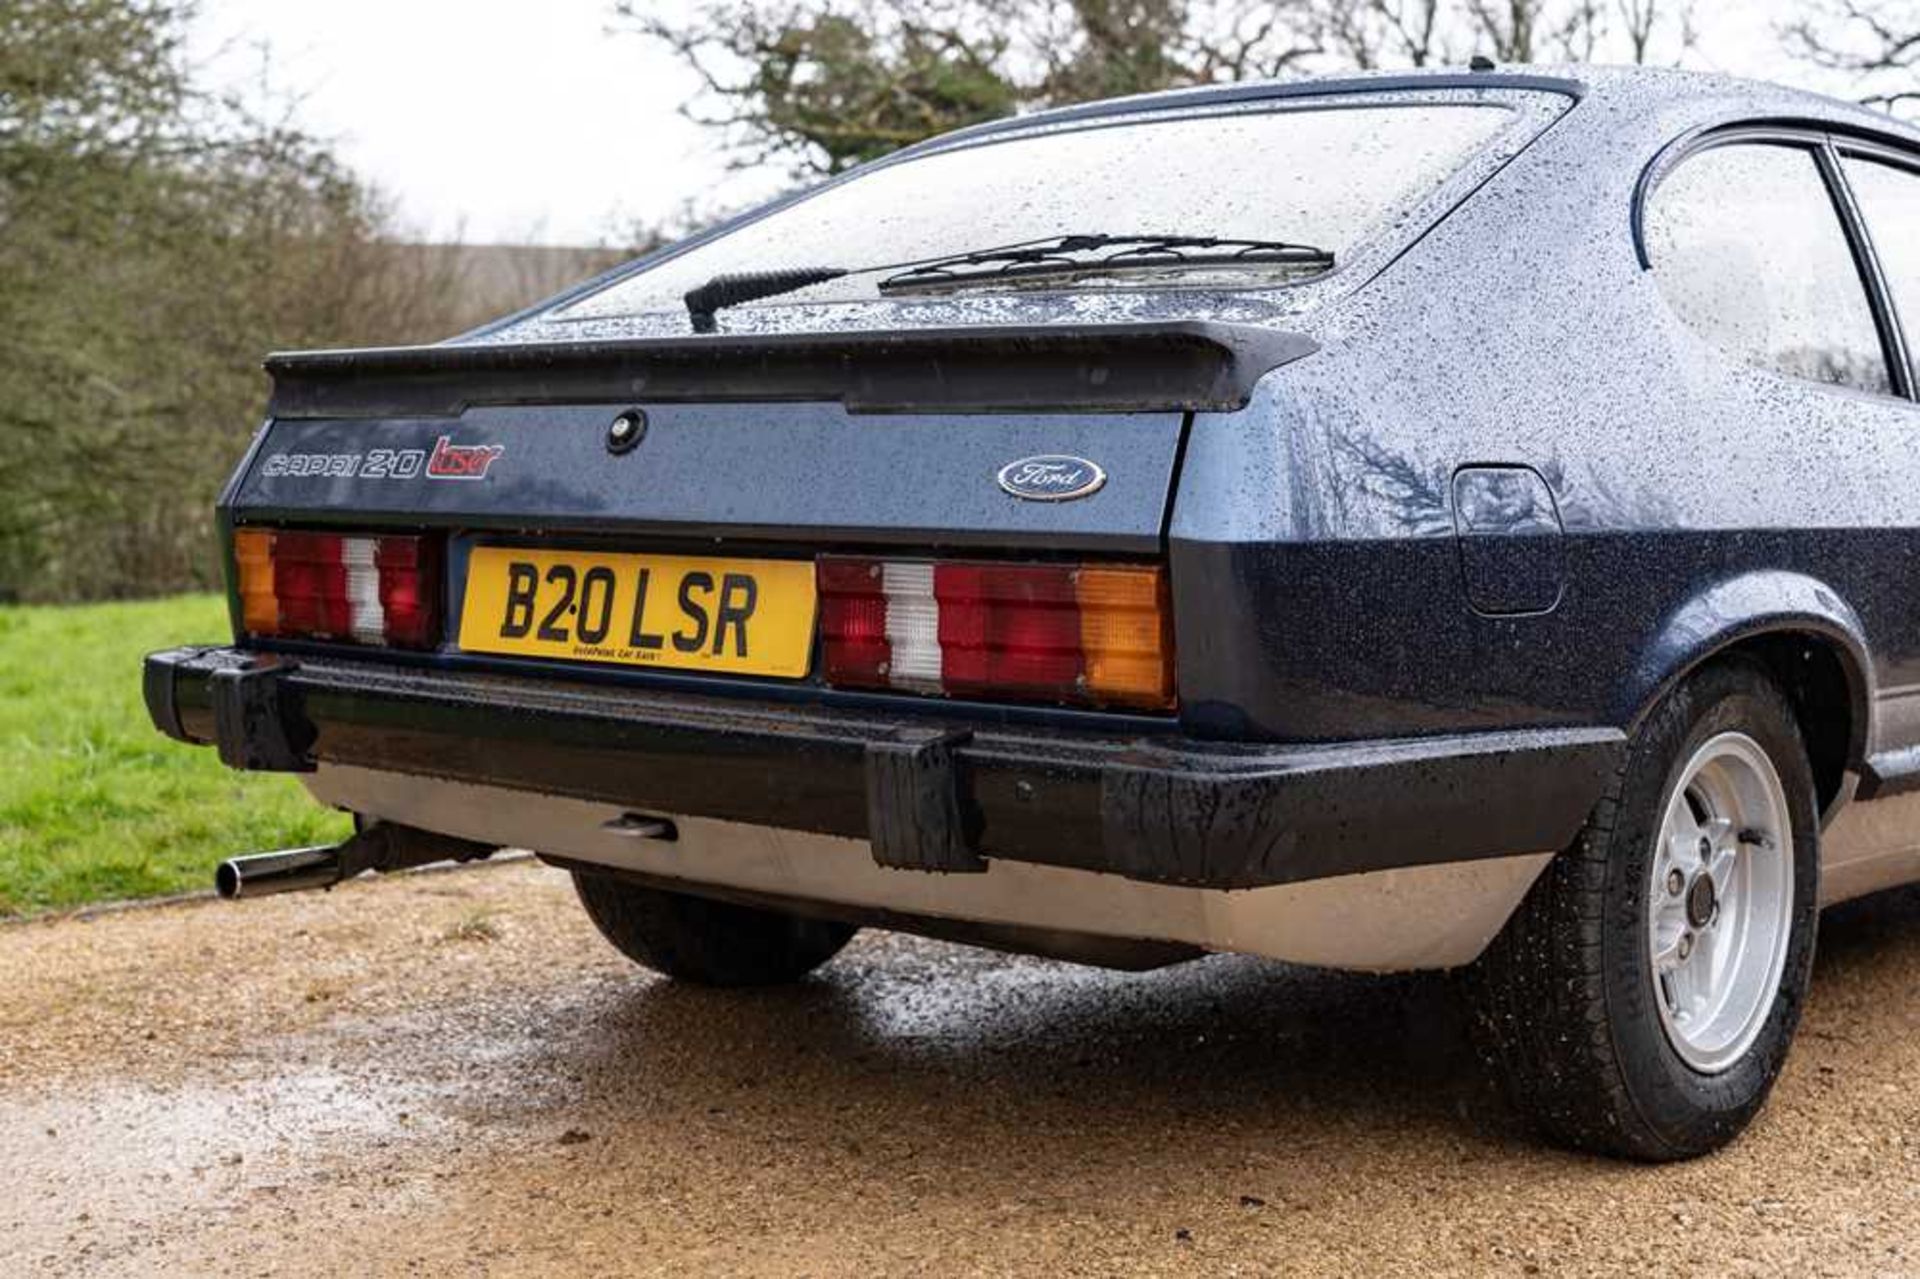 1985 Ford Capri Laser 2.0 Litre Warranted 55,300 miles from new - Image 34 of 67